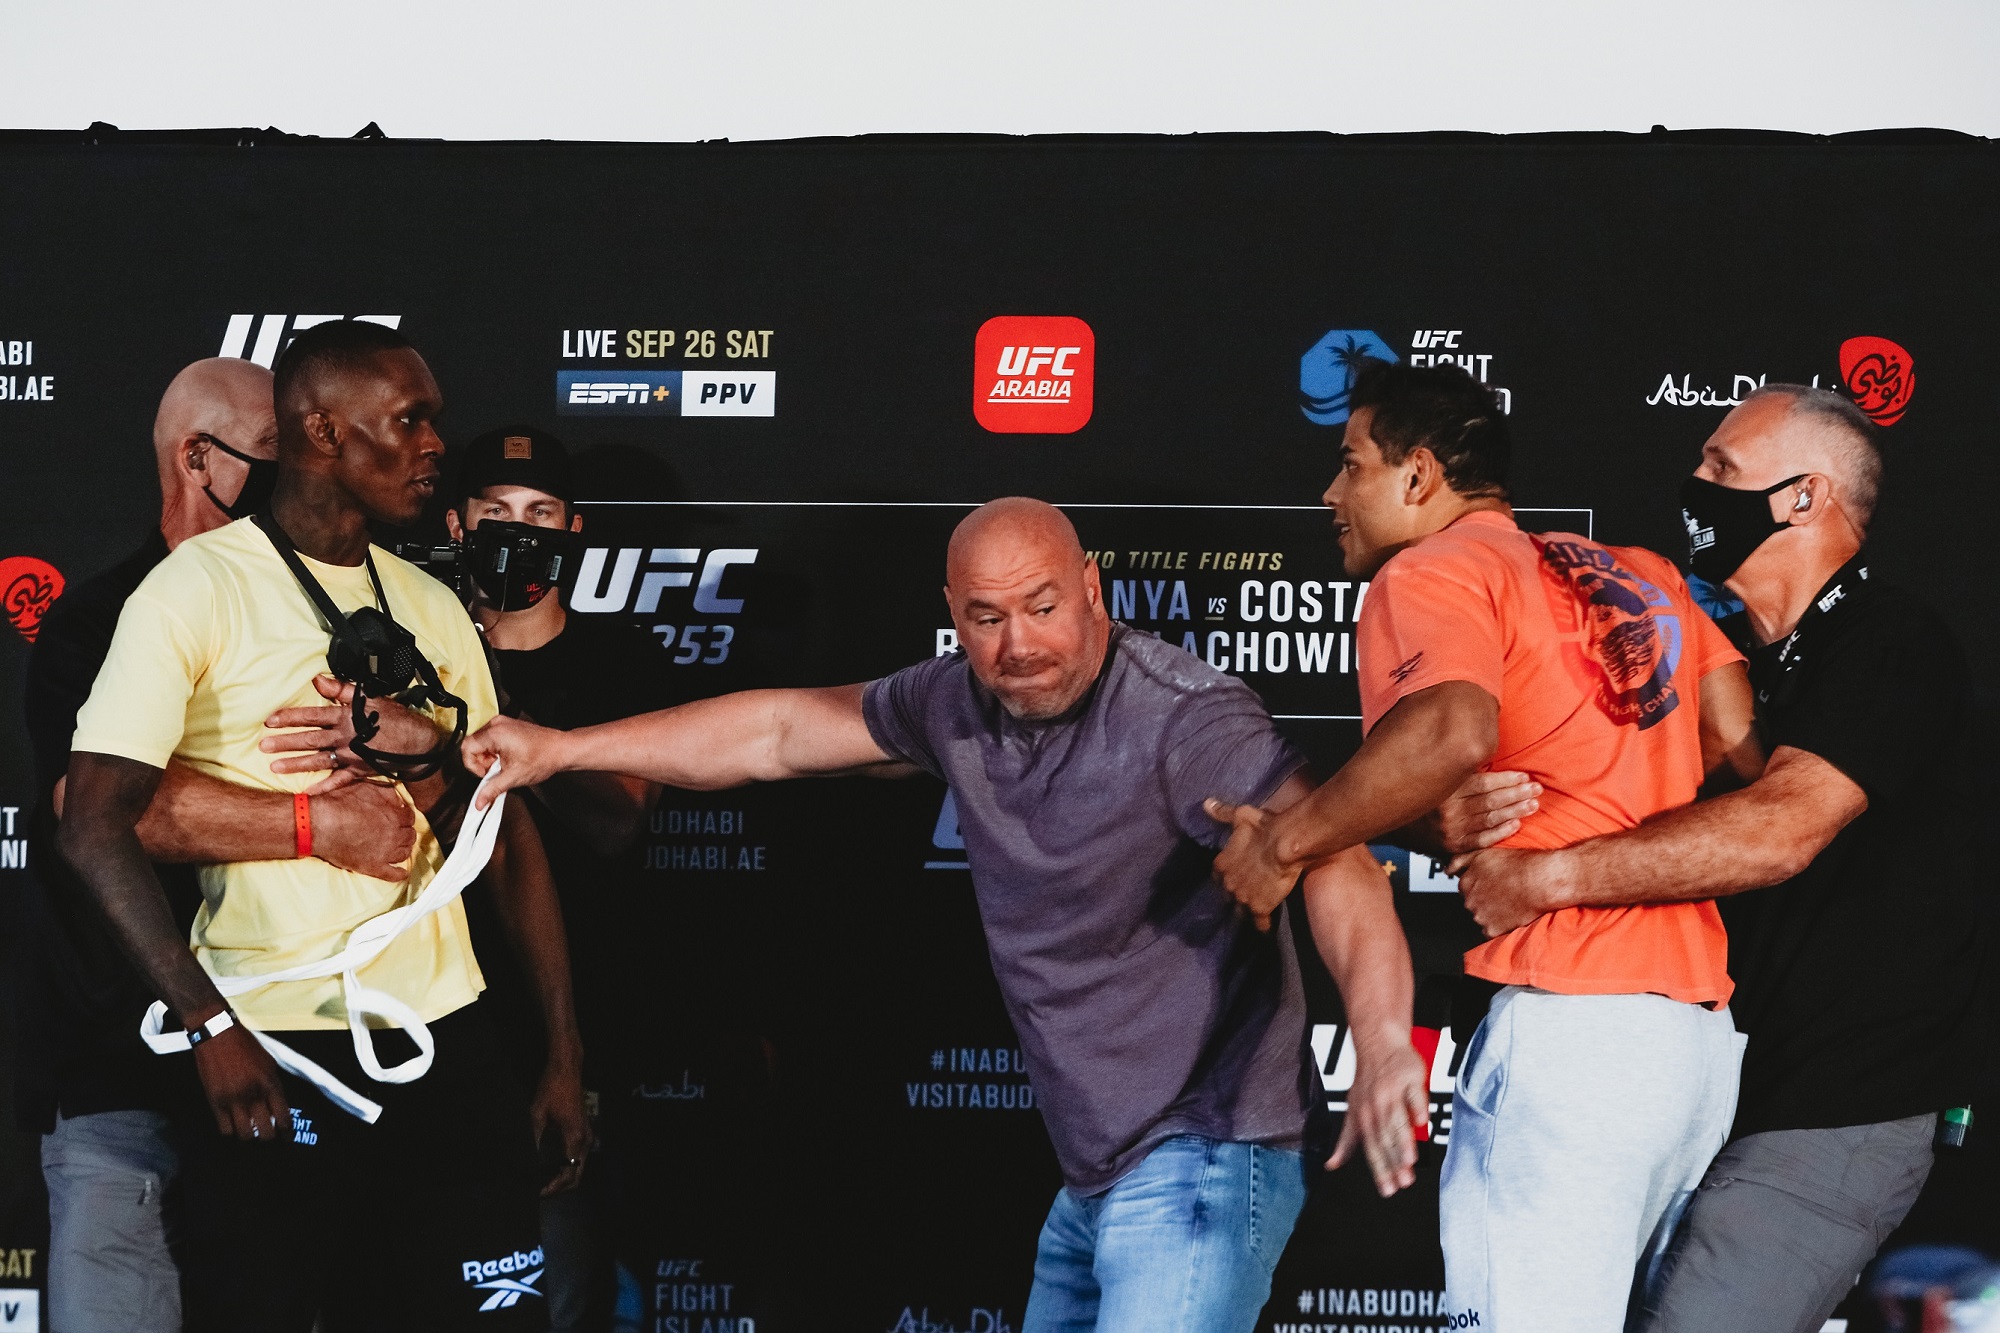 Abu Dhabi’s Return To Fight Island Breaks UFC Viewership Records With Adesanya Vs Costa Face-Off